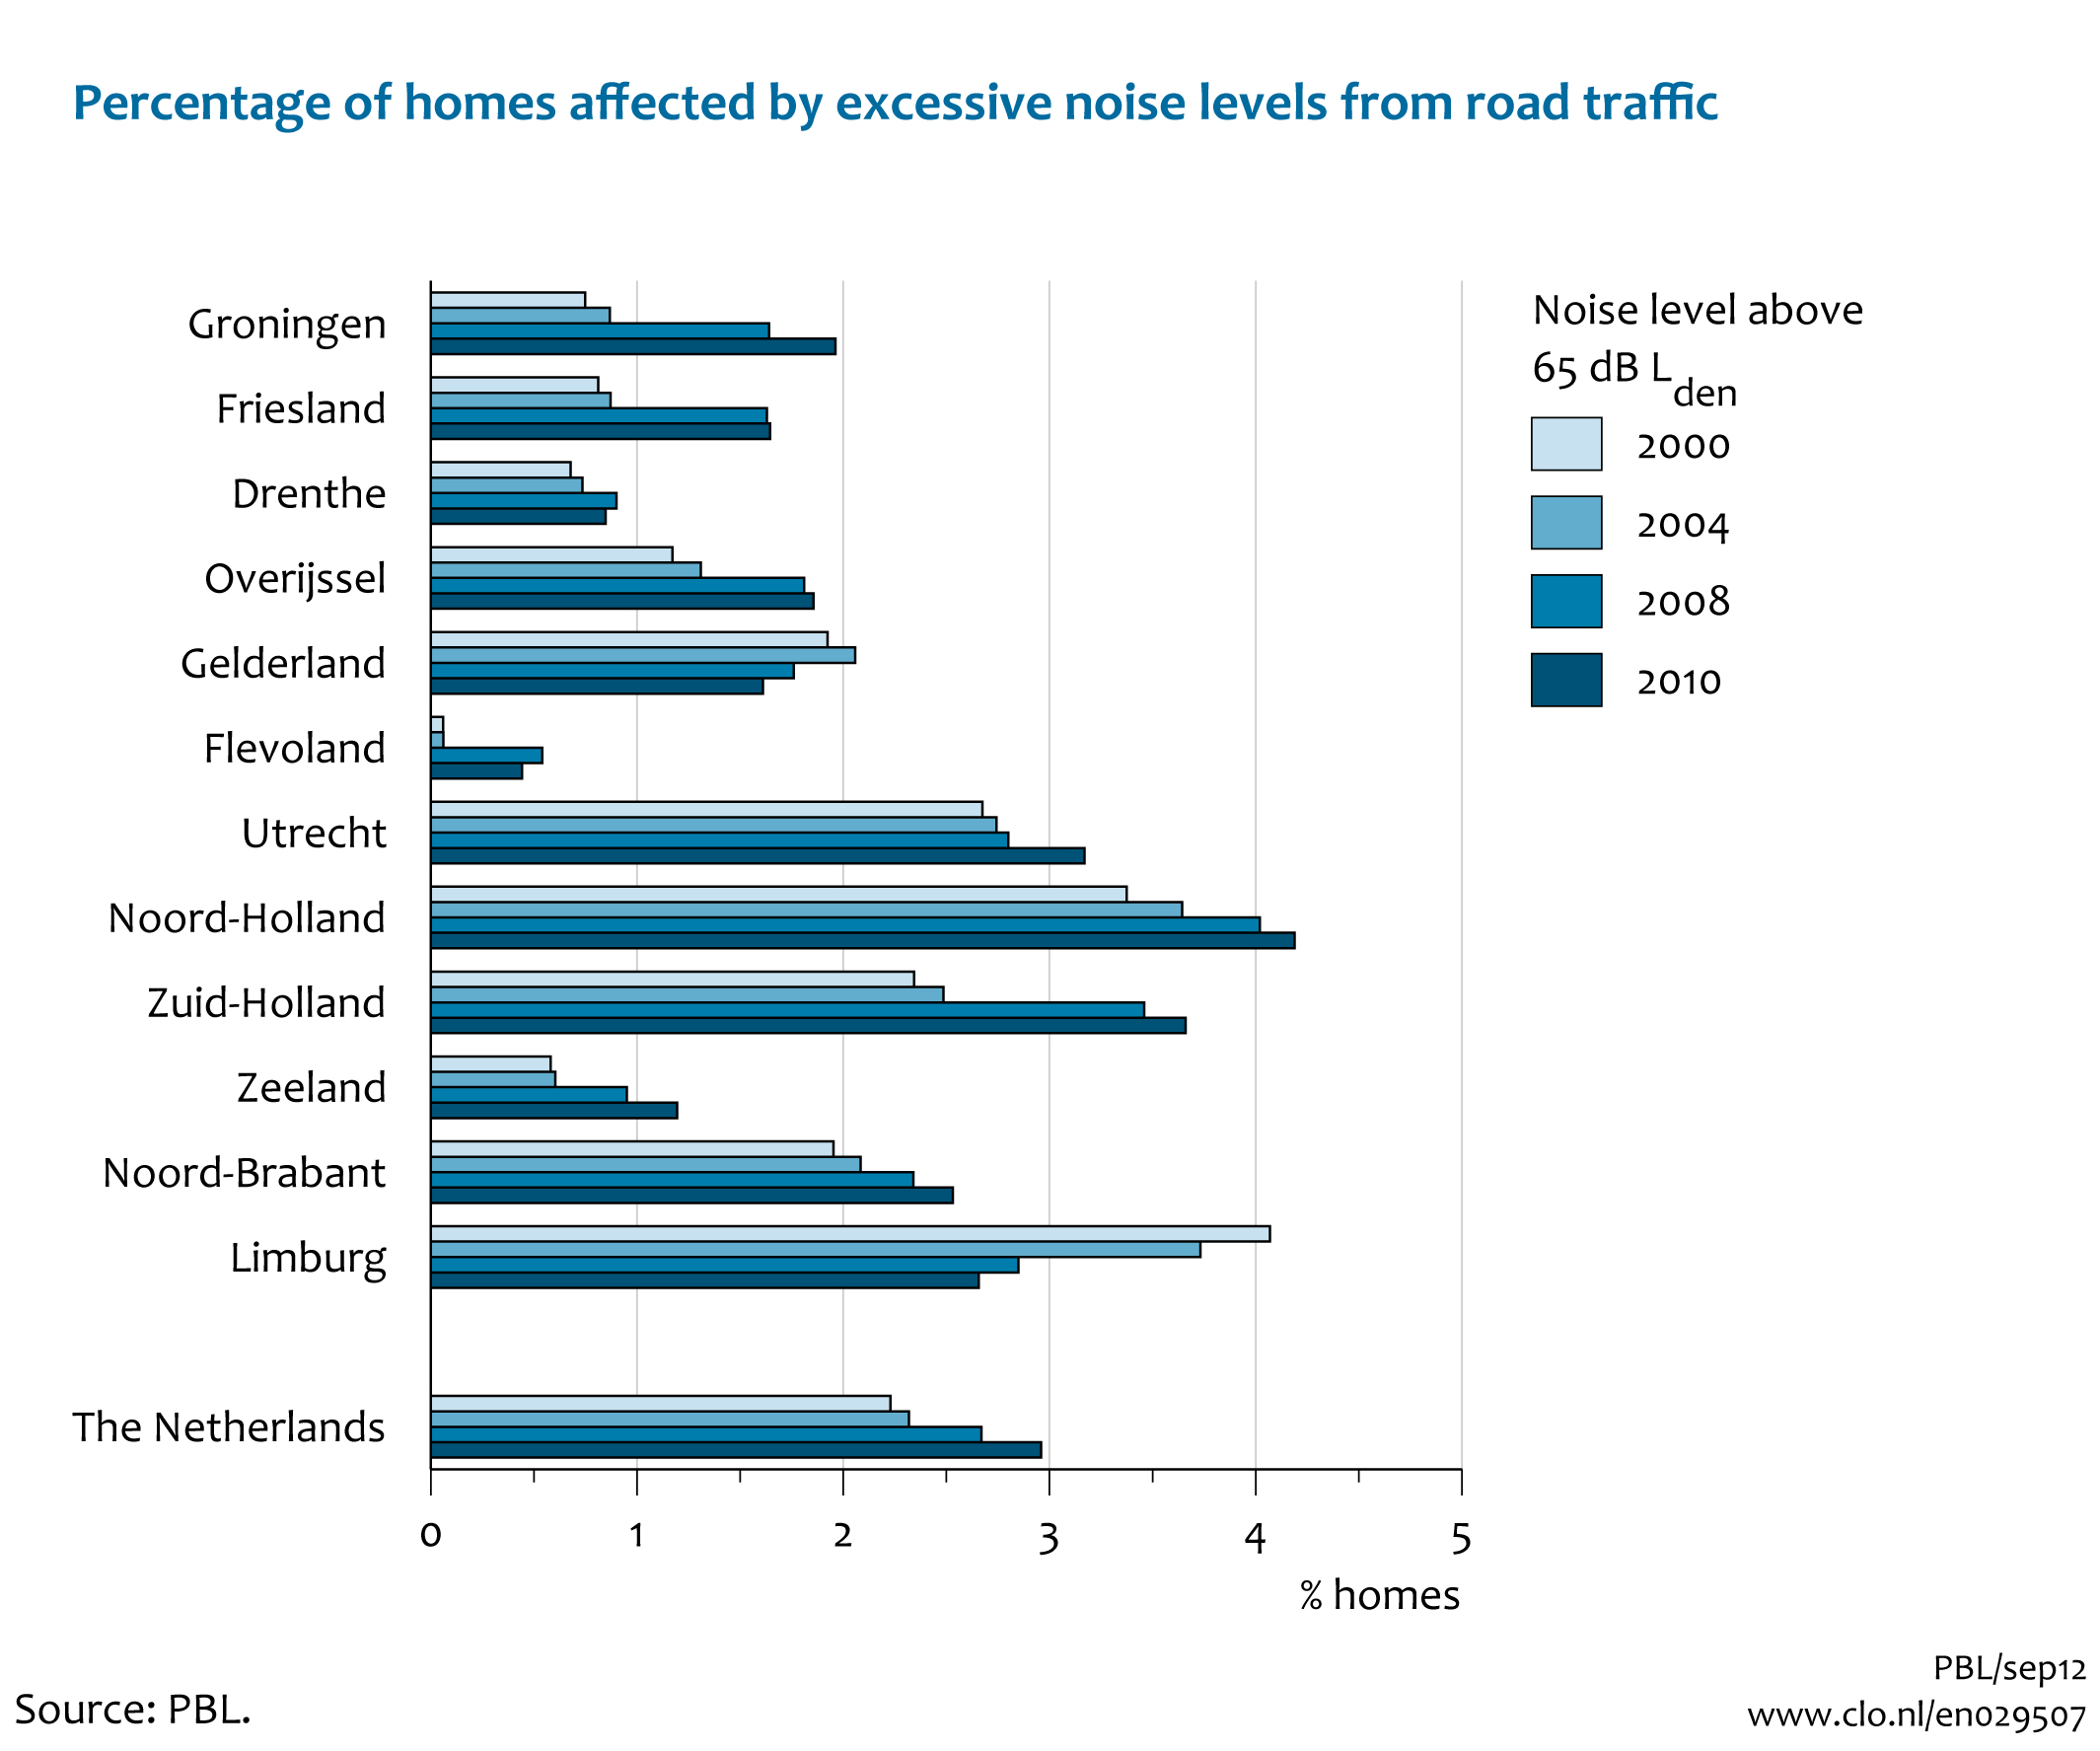 Image Percentage of homes affected by excessive noise levels from road traffic. The image is further explained in the text.